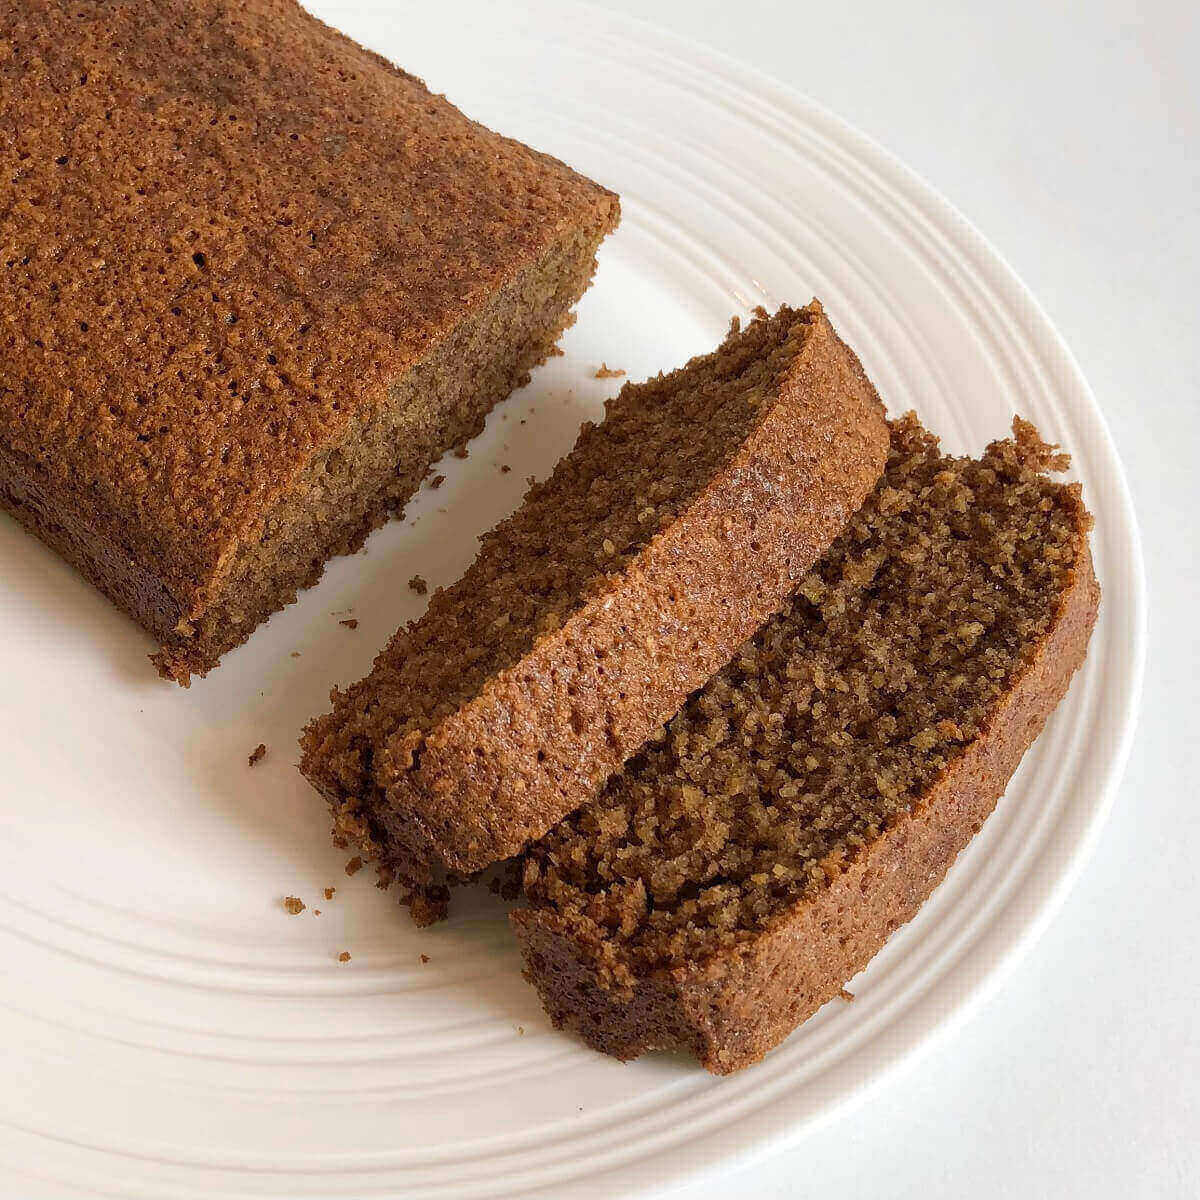 Two thick slices of cake next to the rest of the loaf.